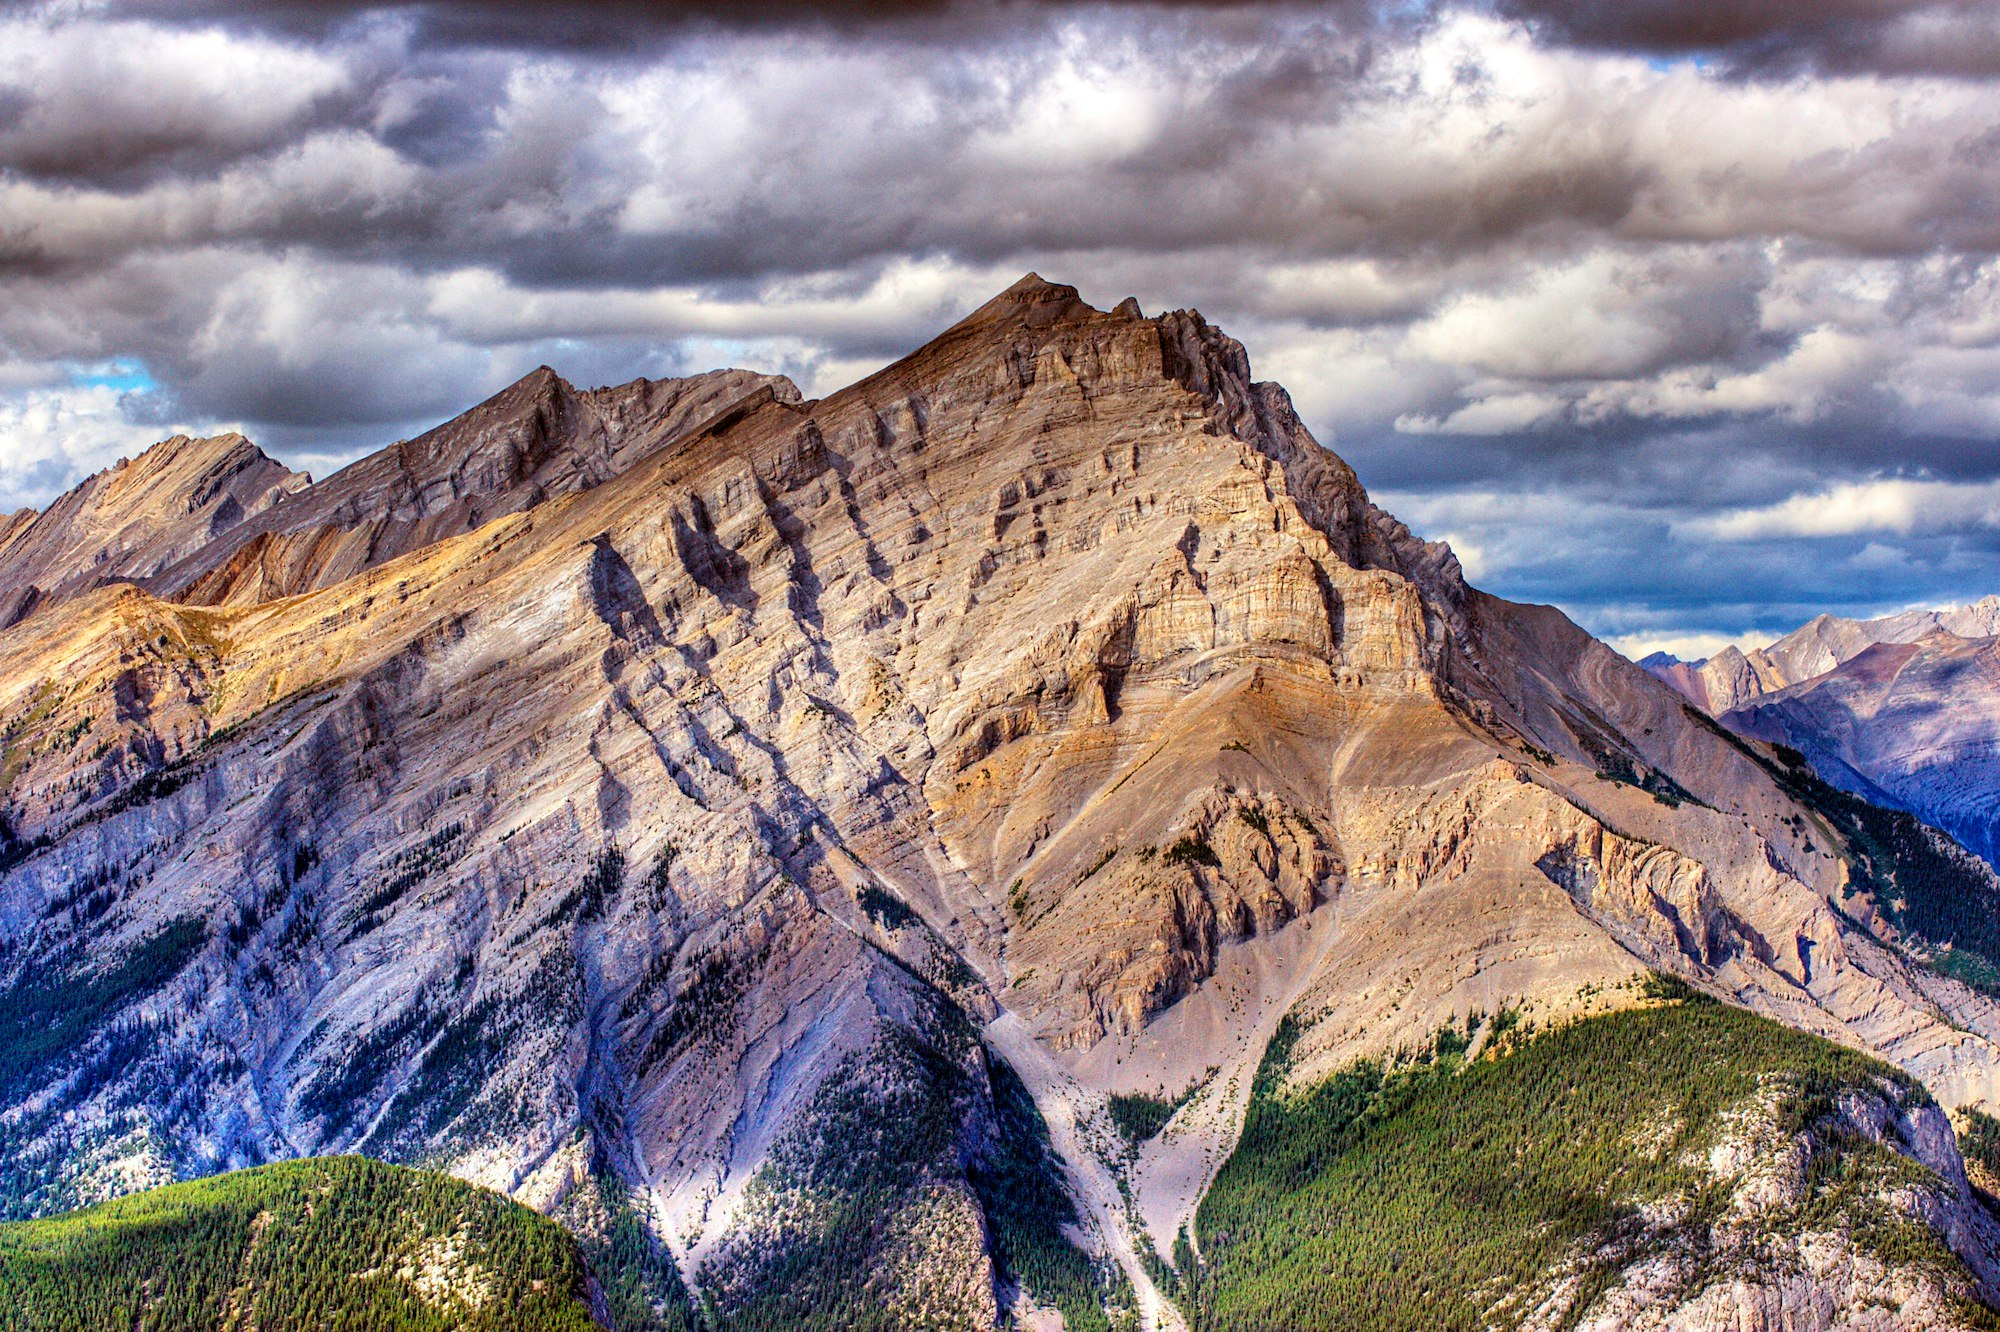 Breathtaking mountain seen from the top of the gondola in Banff, Alberta, Canada.